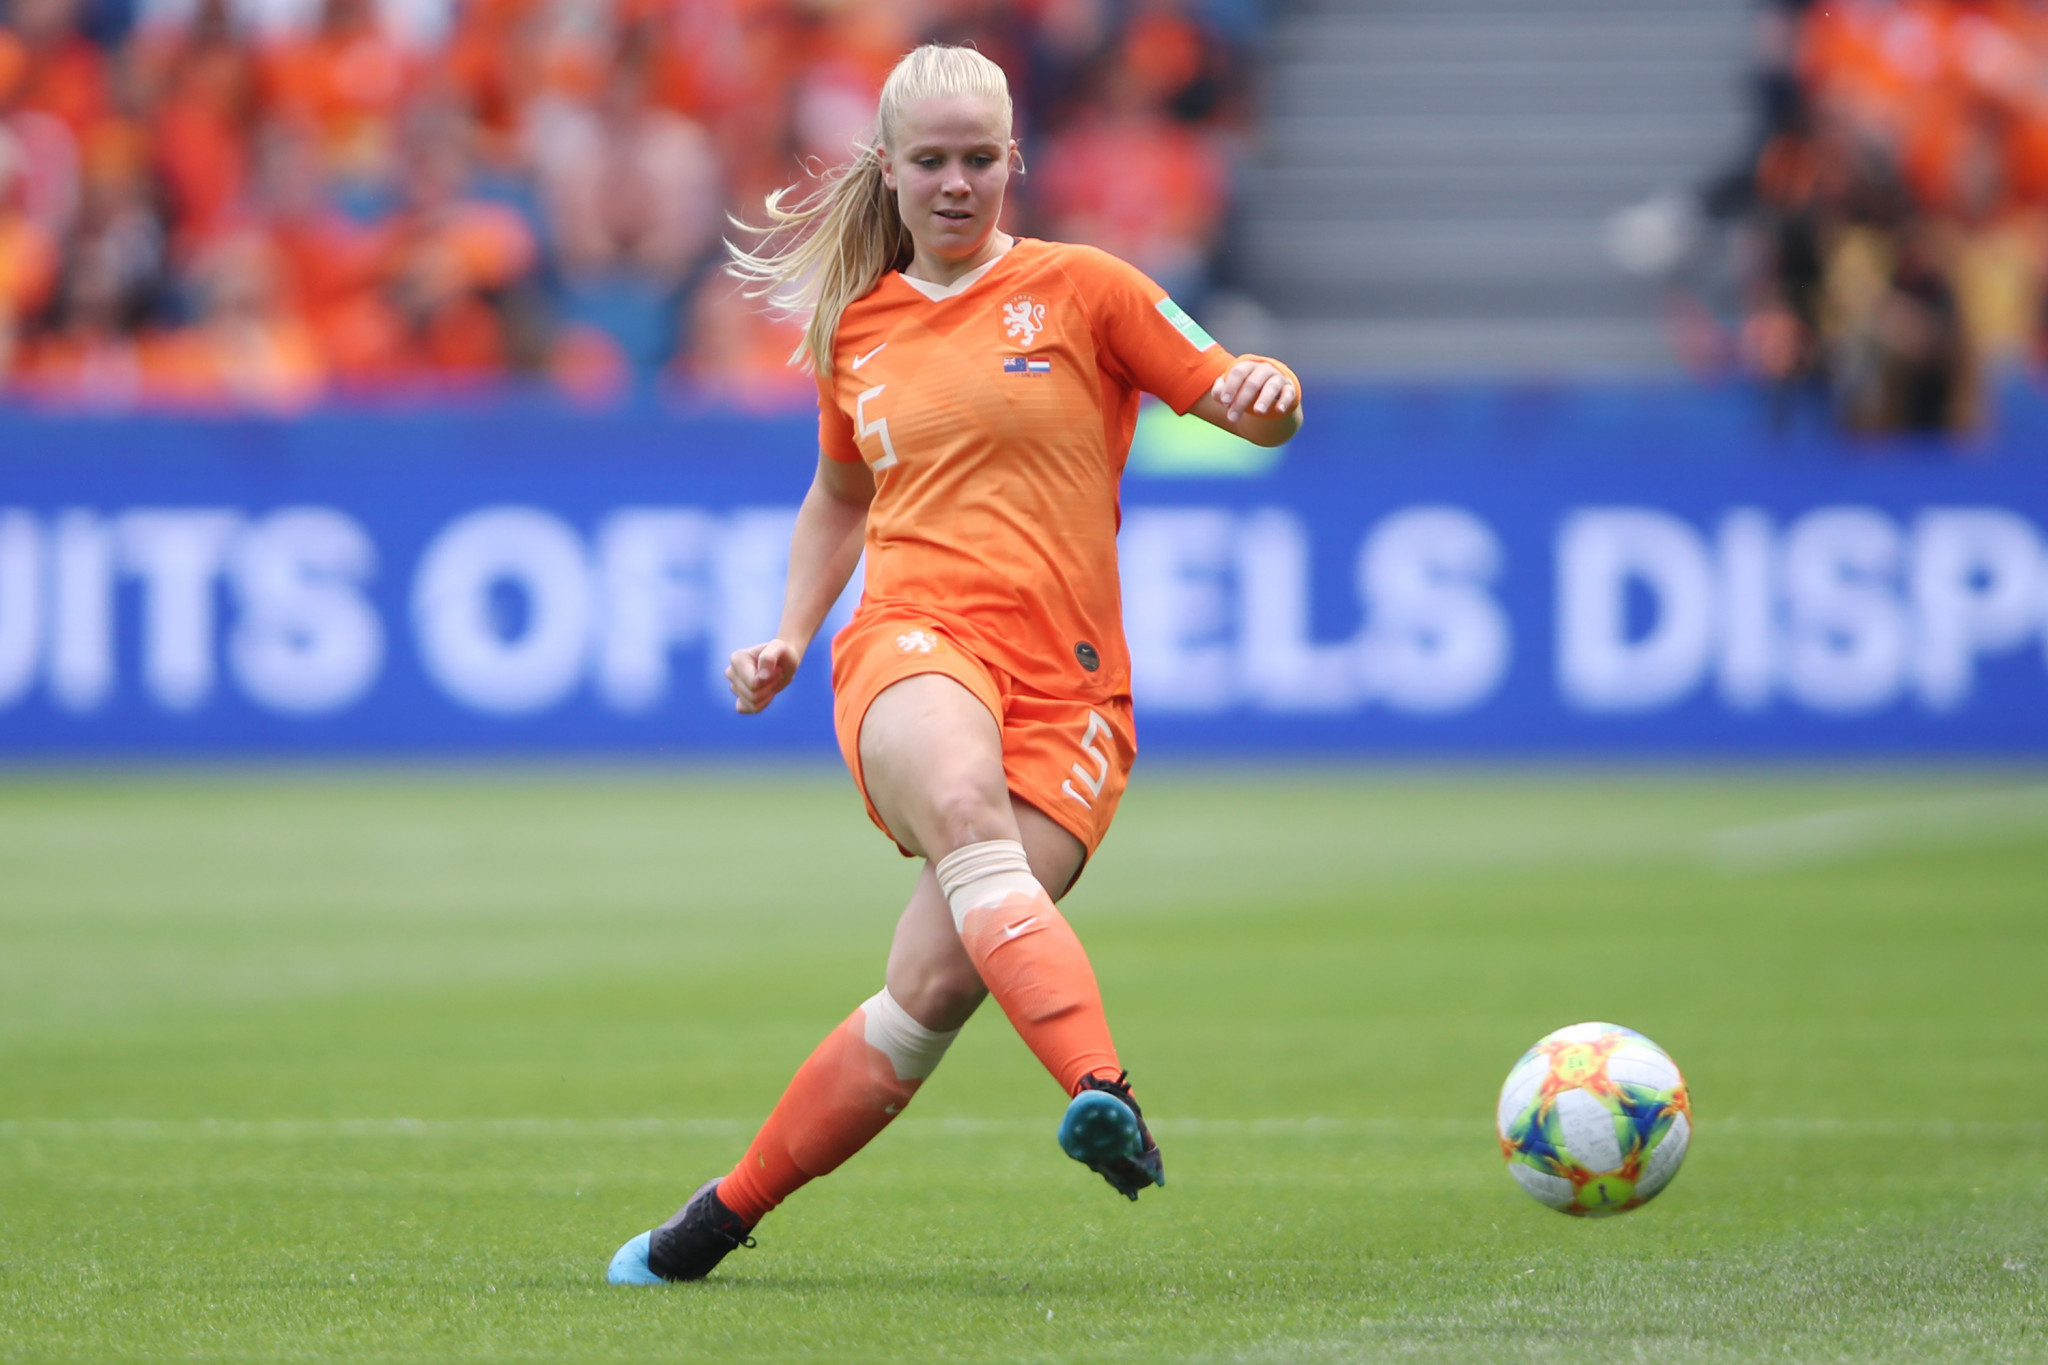 European champions The Netherlands faced a tough battle against New Zealand in their first match of the tournament ©Getty Images